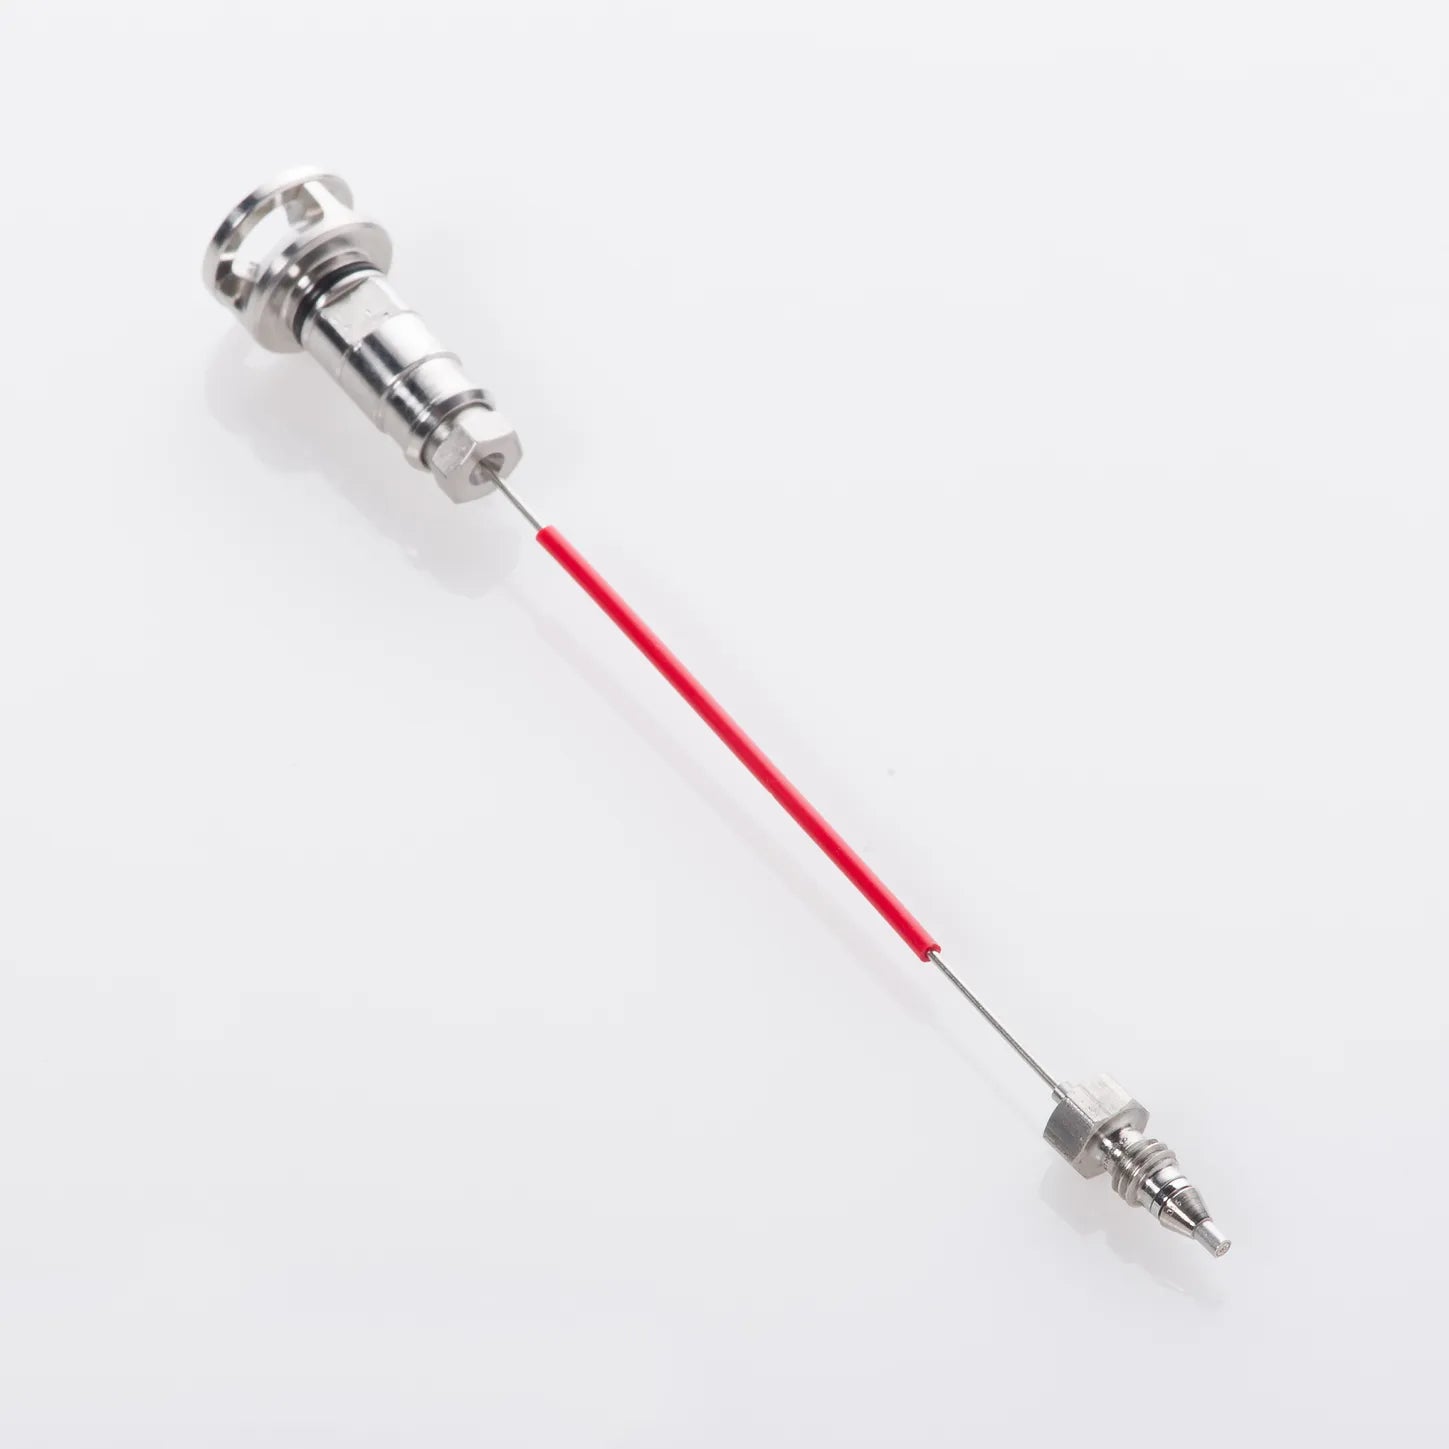 Needle Seat Assembly, 0.12mm ID, Comparable to Agilent # G4226-87012